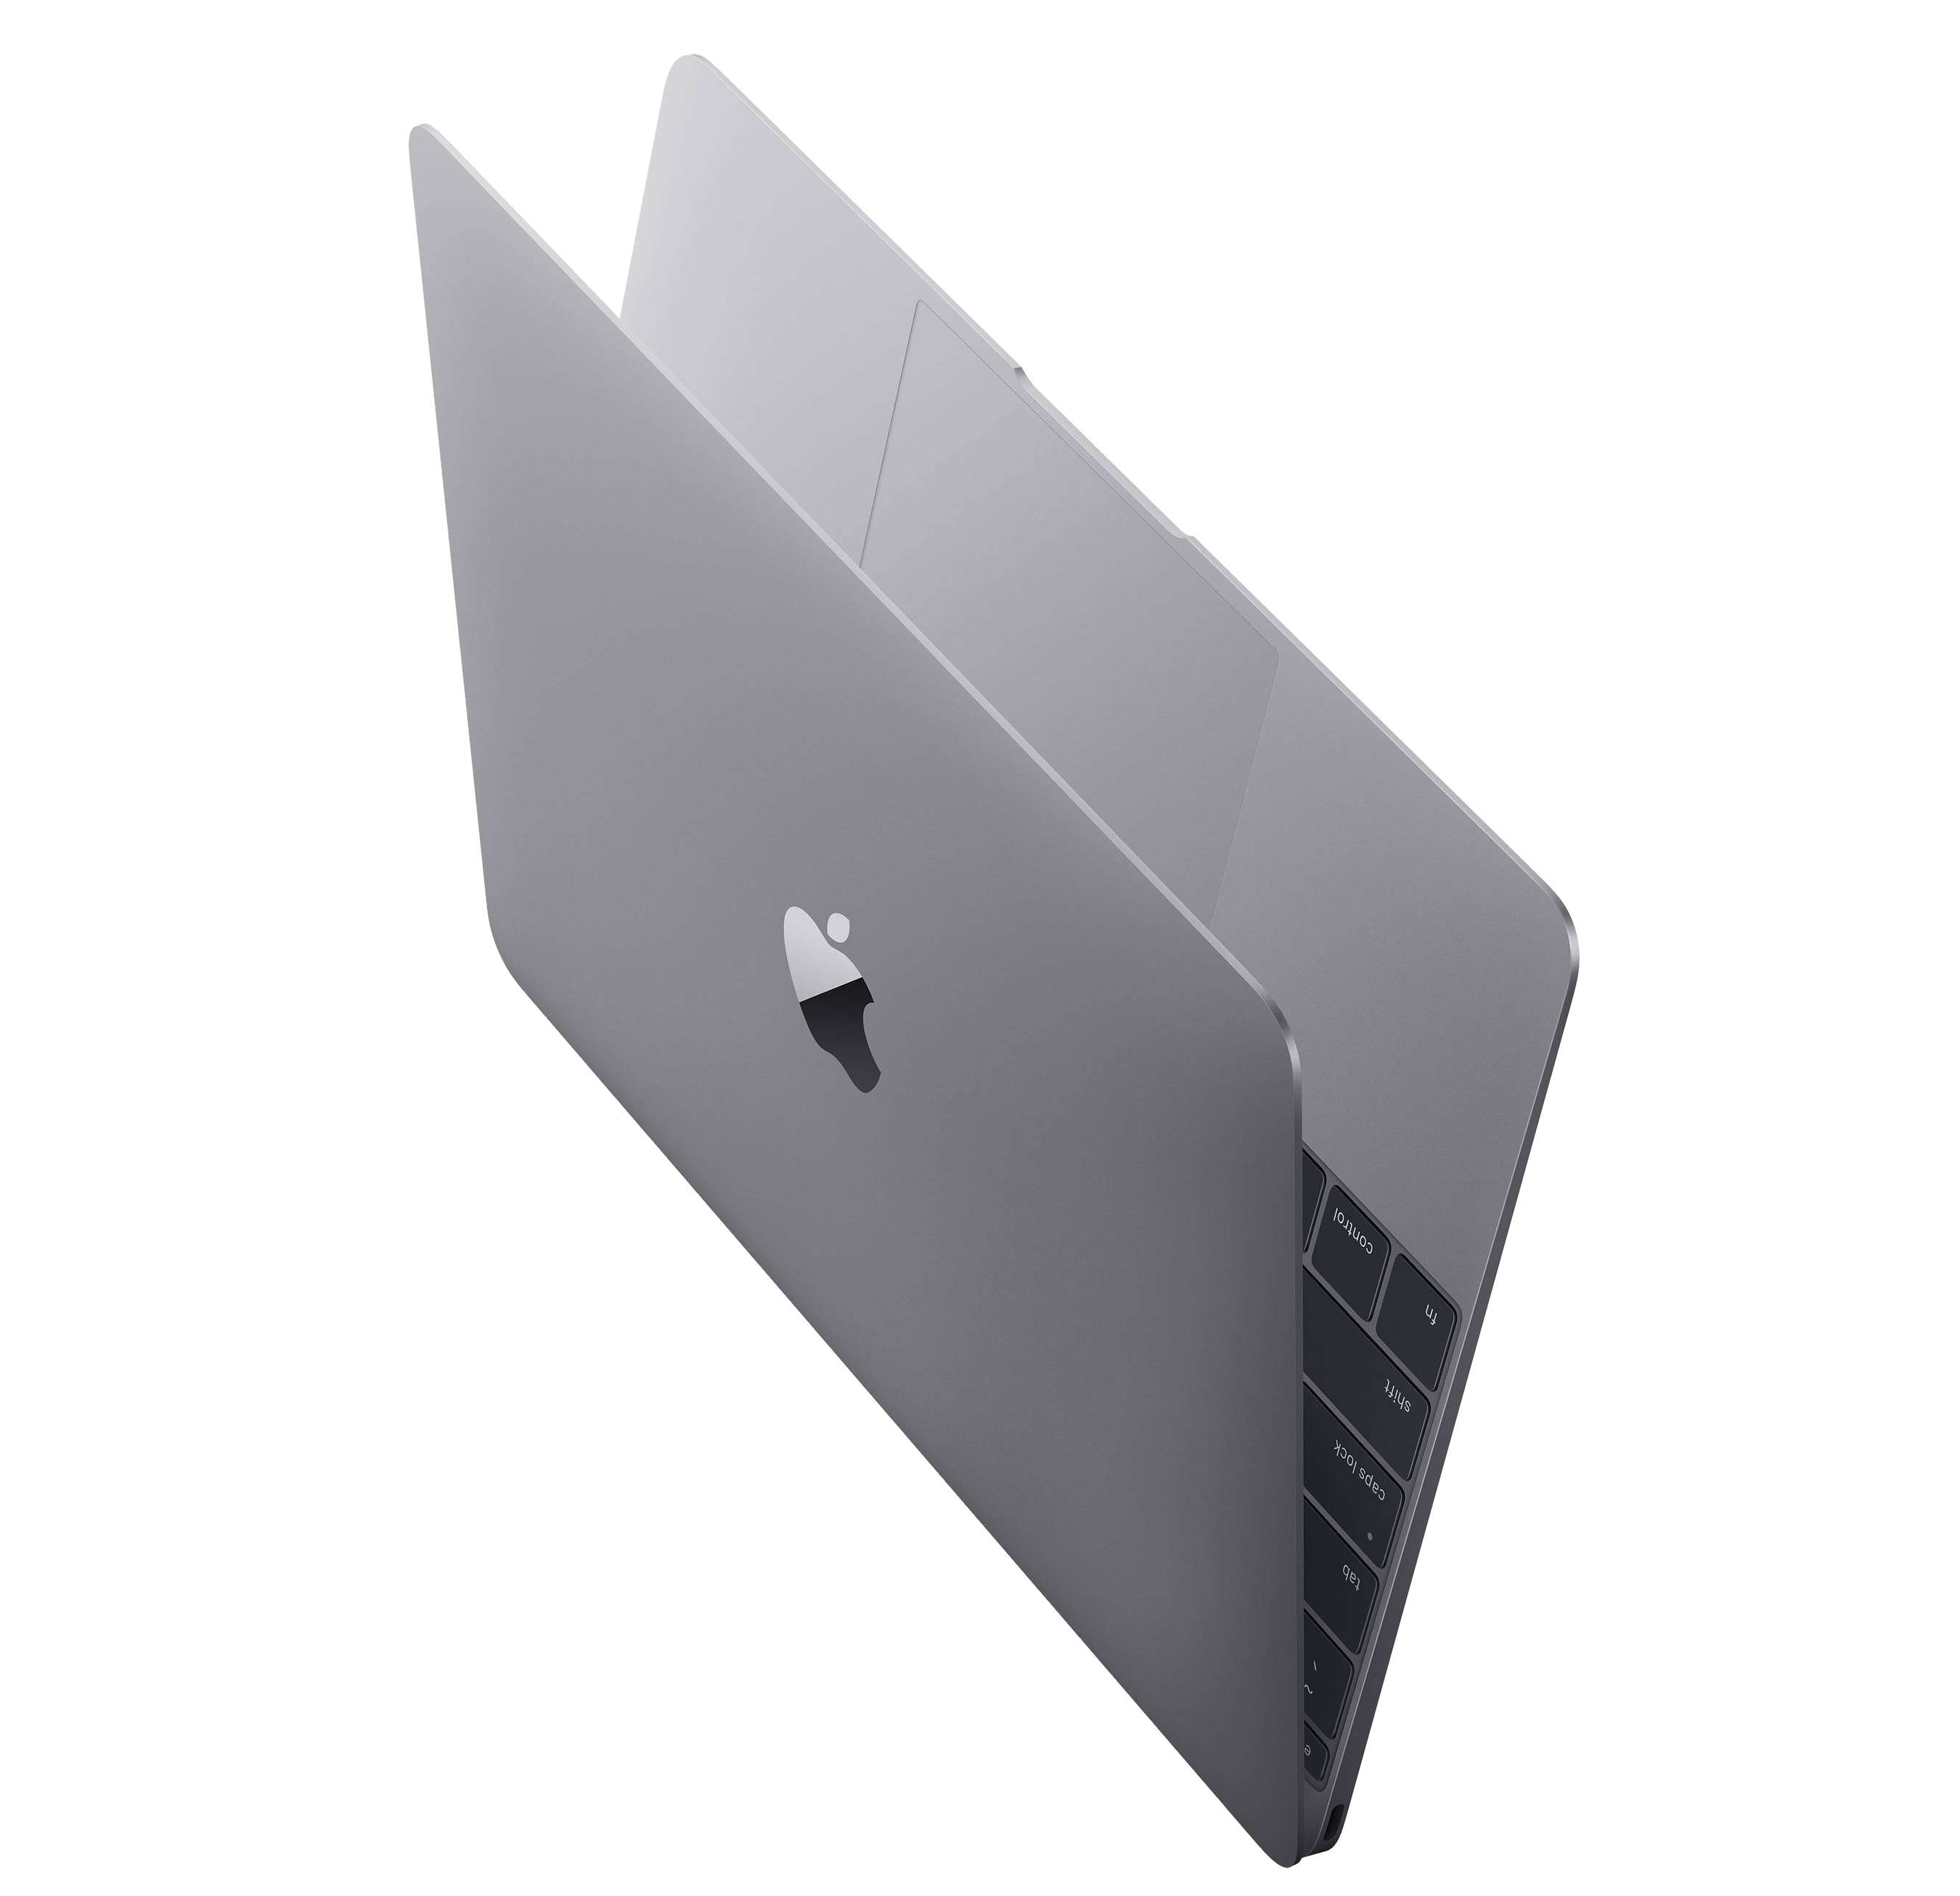 Refurbished Apple A Grade Macbook 12 Inch Laptop Retina Space Gray 1 3ghz Core M Early 15 Mjy32ll A Bto 512 Gb Ssd 8 Gb Memory 2304x1440 Display Mac Os X V10 12 Sierra Power Adapter Sold